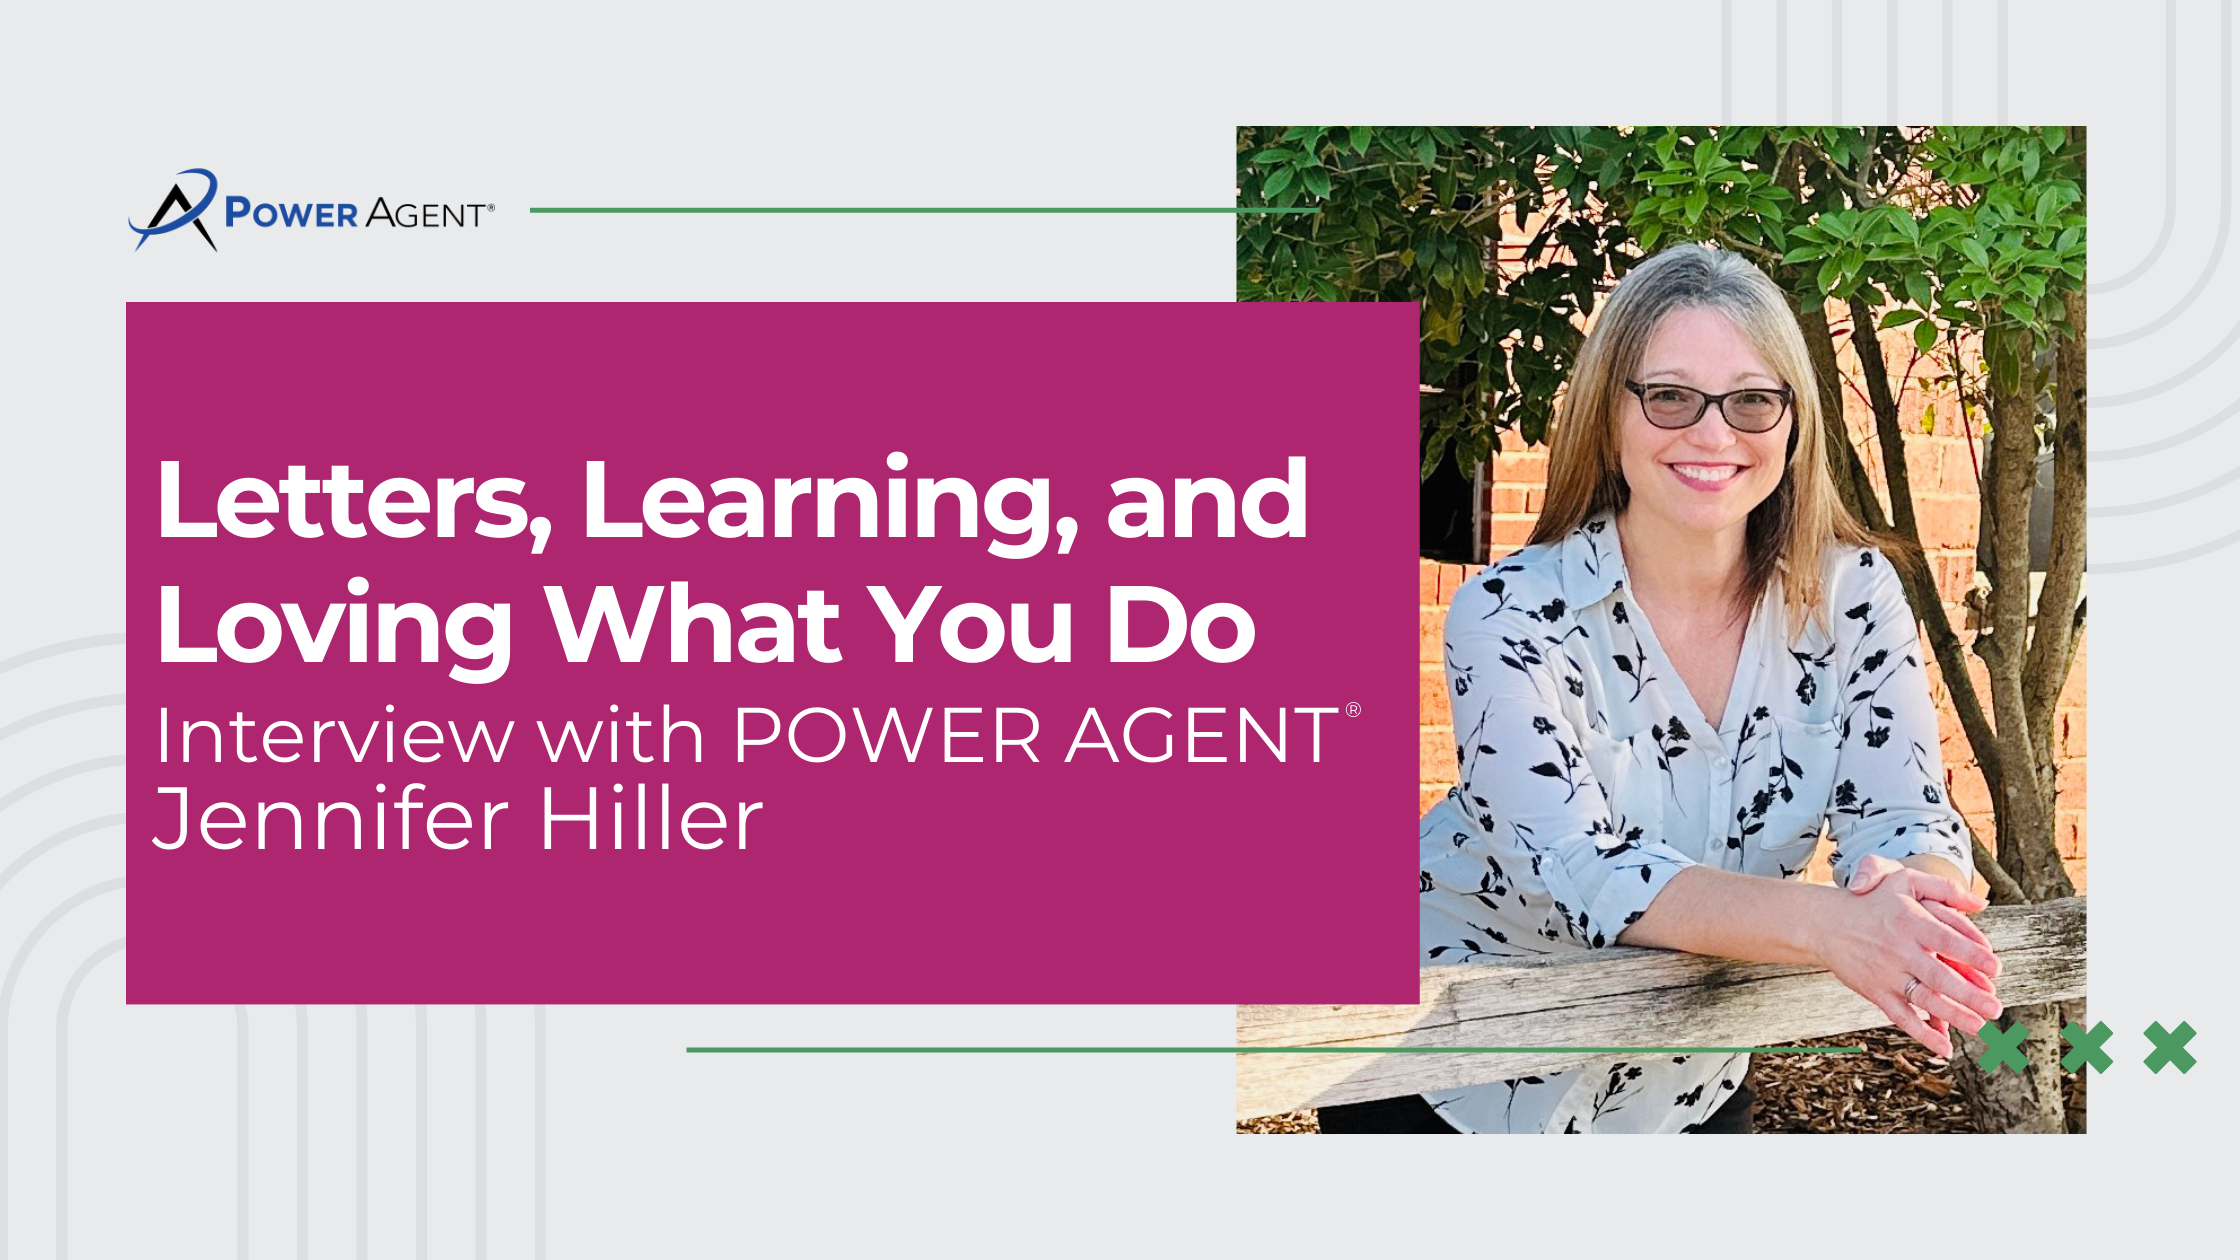 Jennifer Hiller - how to get more listings with letters